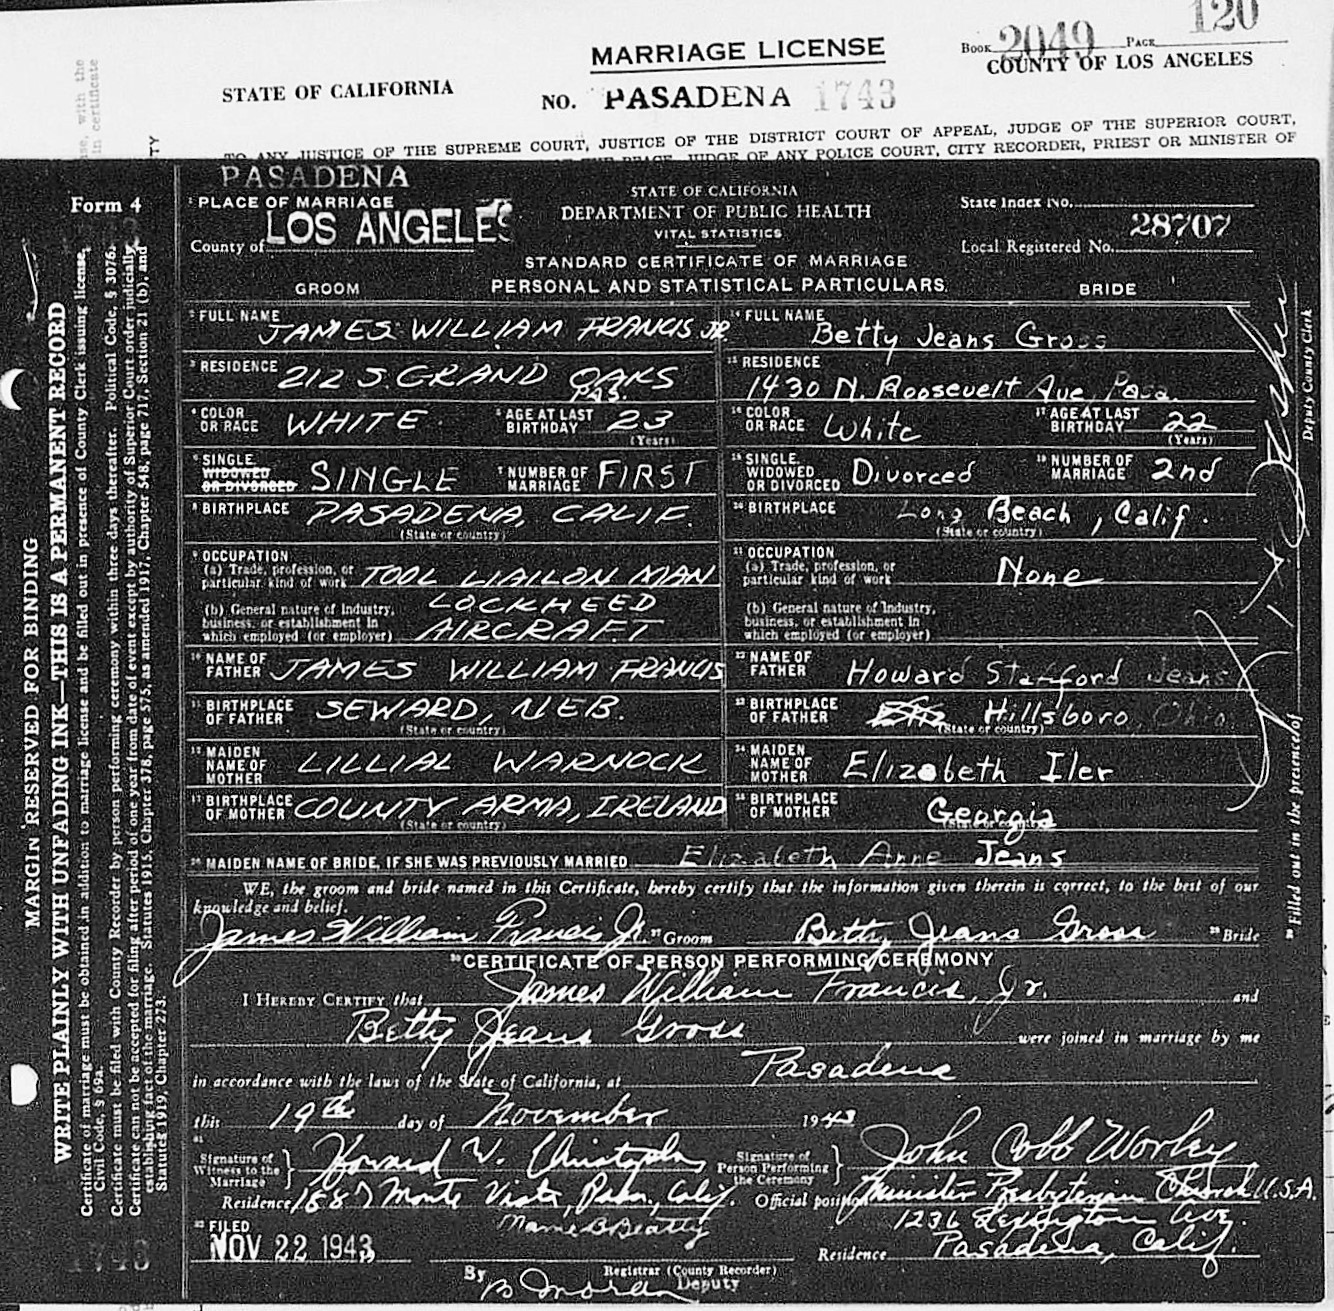  Certificate of Marriage for James William (Bill) Francis, Jr., and Betty Jeans Gross  Betty and Bill married on Friday, Nov. 19, 1943. Betty had had a brief earlier marriage to a man named Gross and had a son, Brian, by that marriage. Jeans was her 